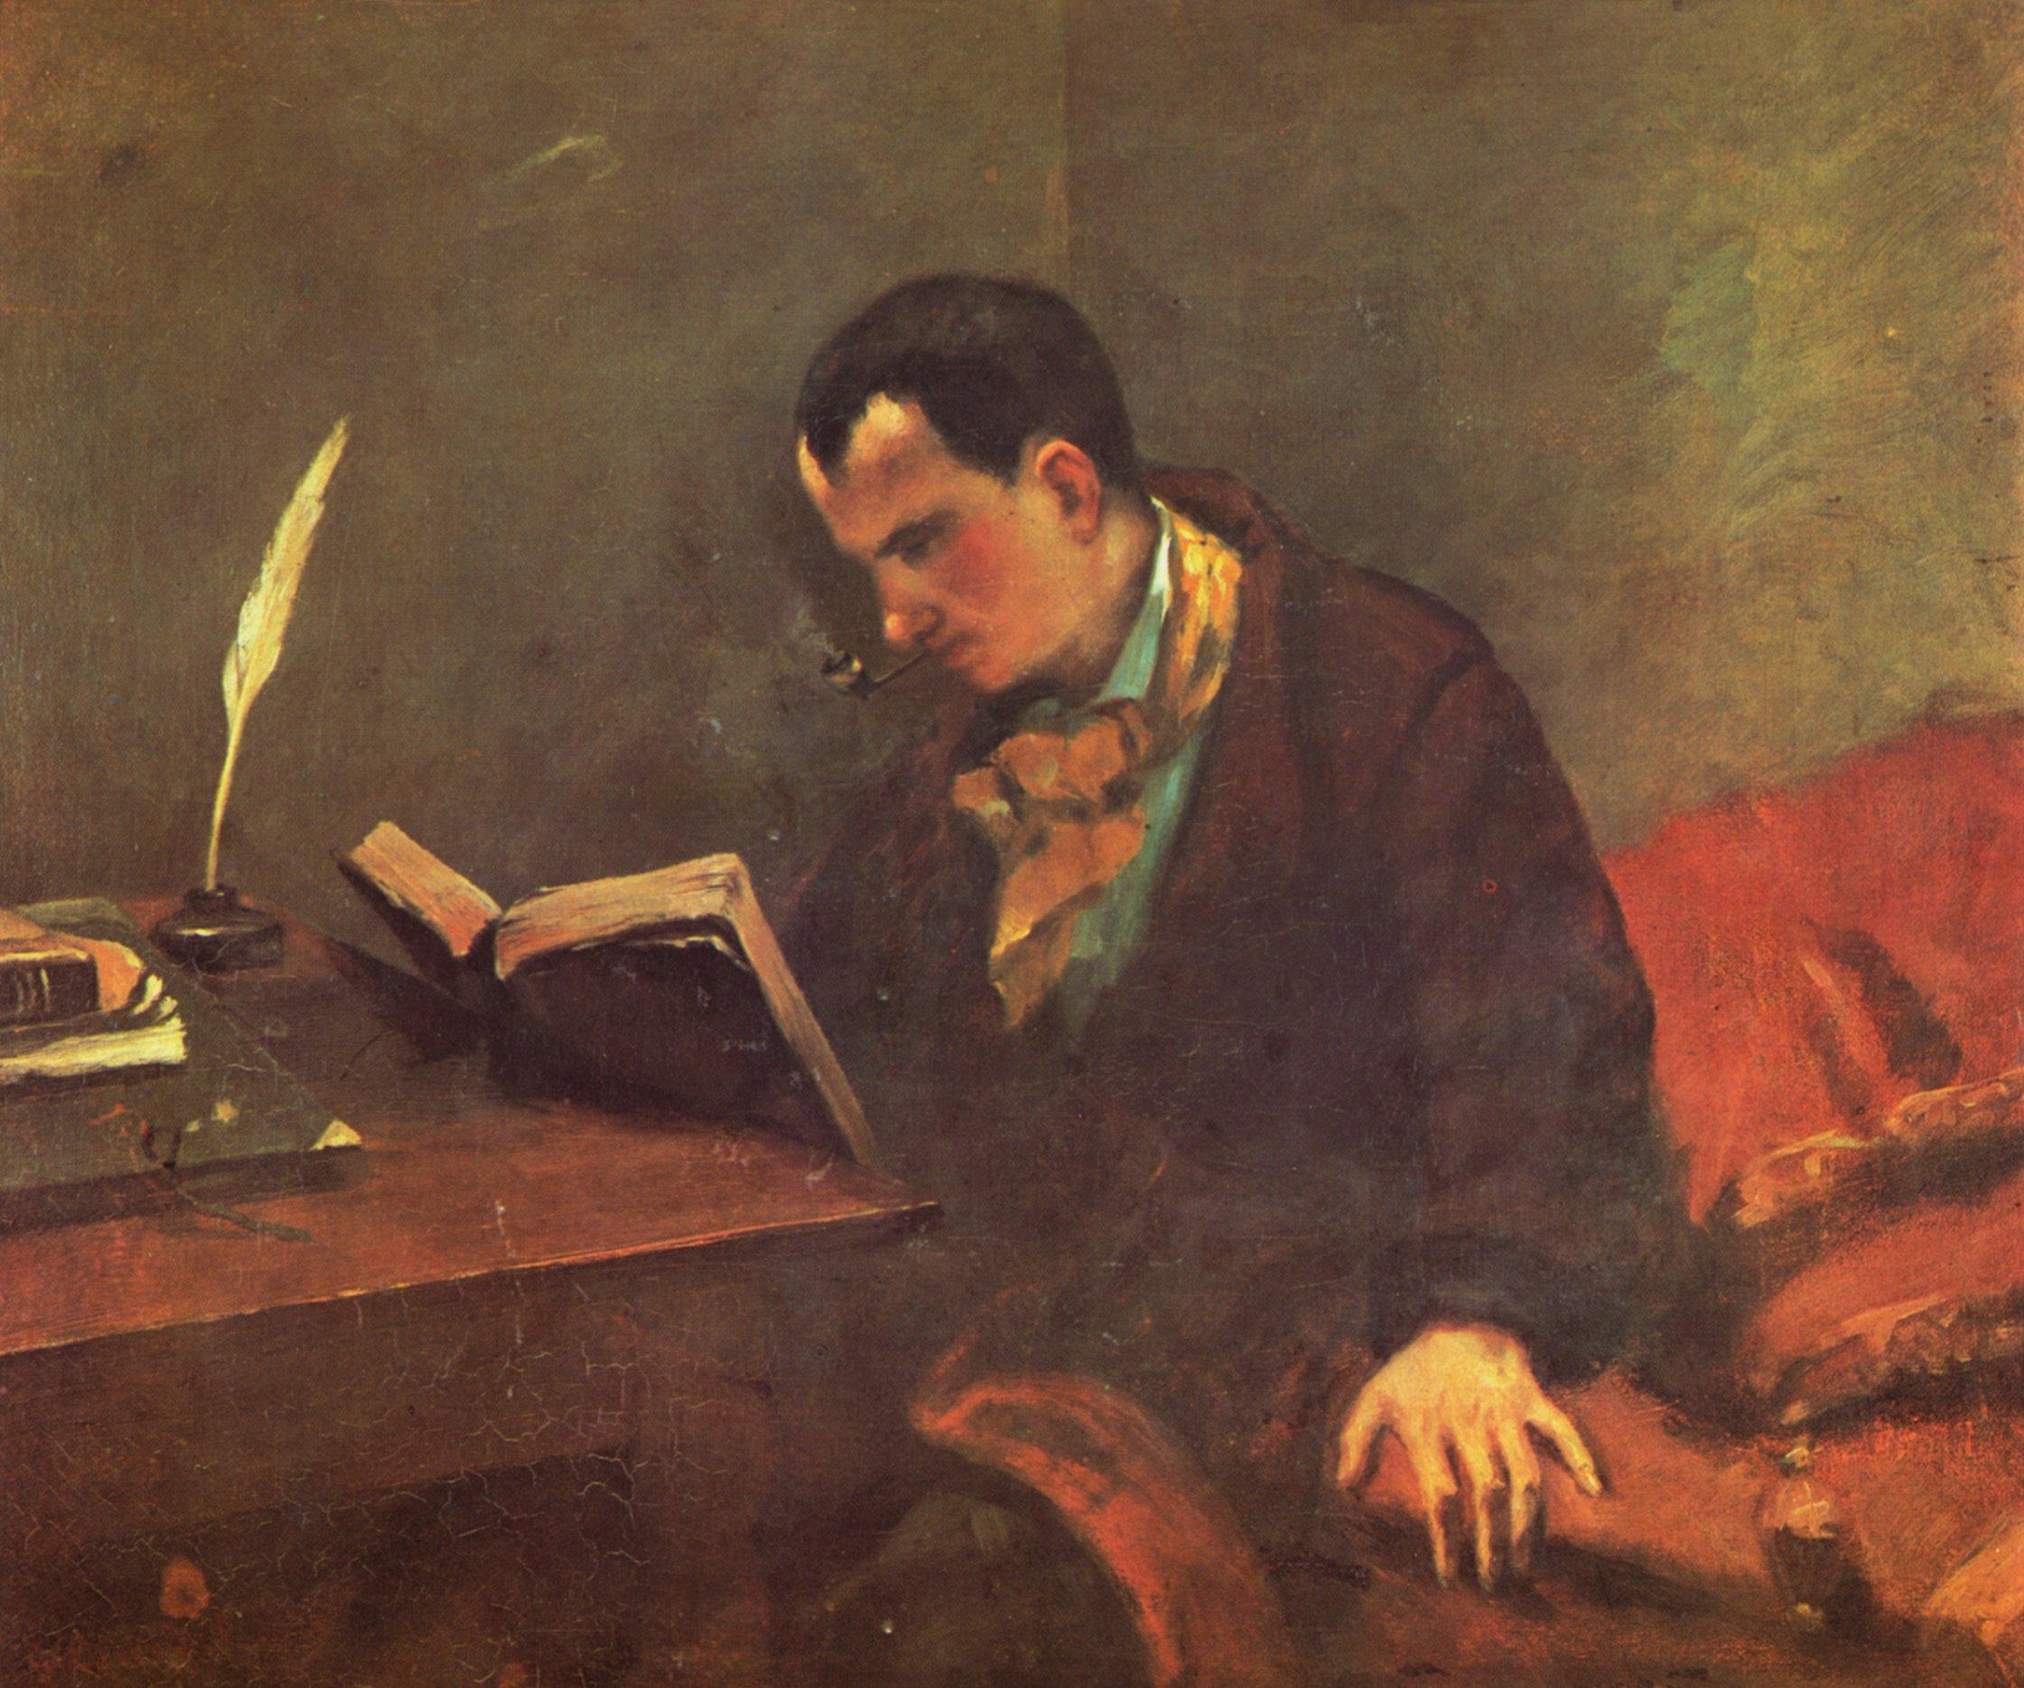 Charles Baudelaire, Poets, Gustave Courbet, Classic art, Oil painting, Smoking pipe Wallpaper